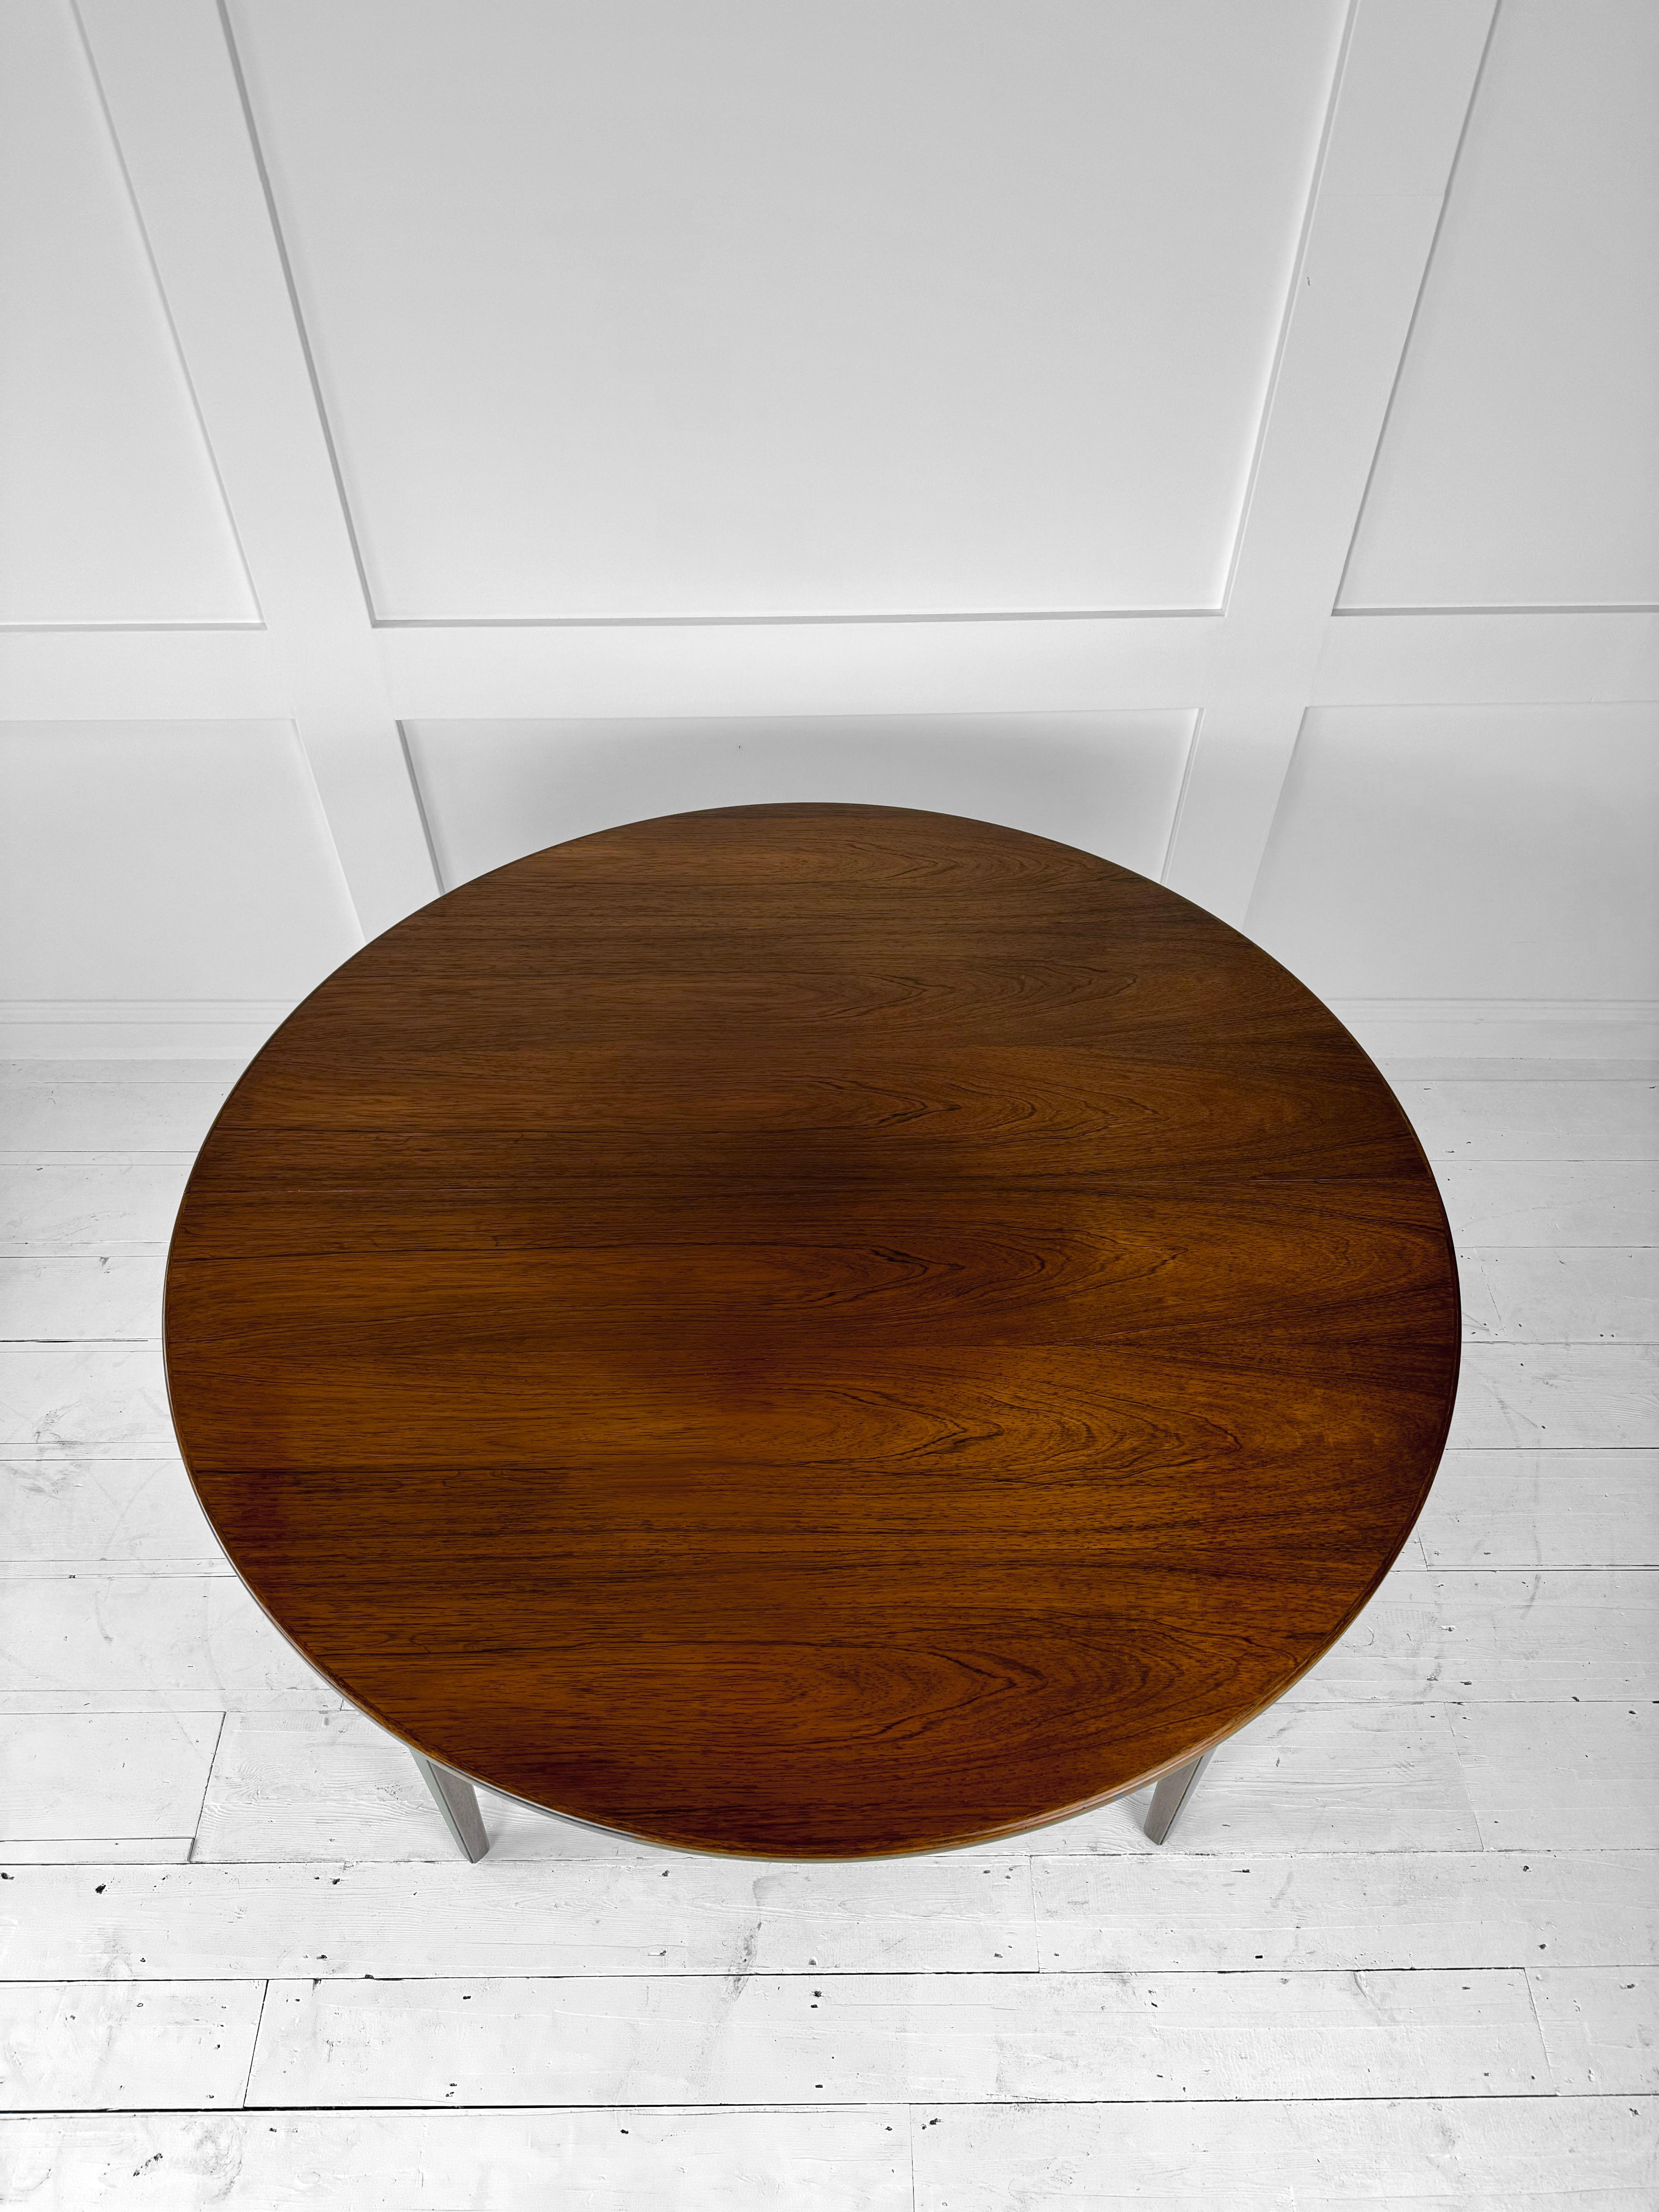 This Omann Jun model 55 Rosewood extending dining table for Omann Jun Møbelfabrik, is a stunning piece that embodies the iconic Danish furniture design of the 1960s. Crafted from rich rosewood, this table features a classic and elegant look that